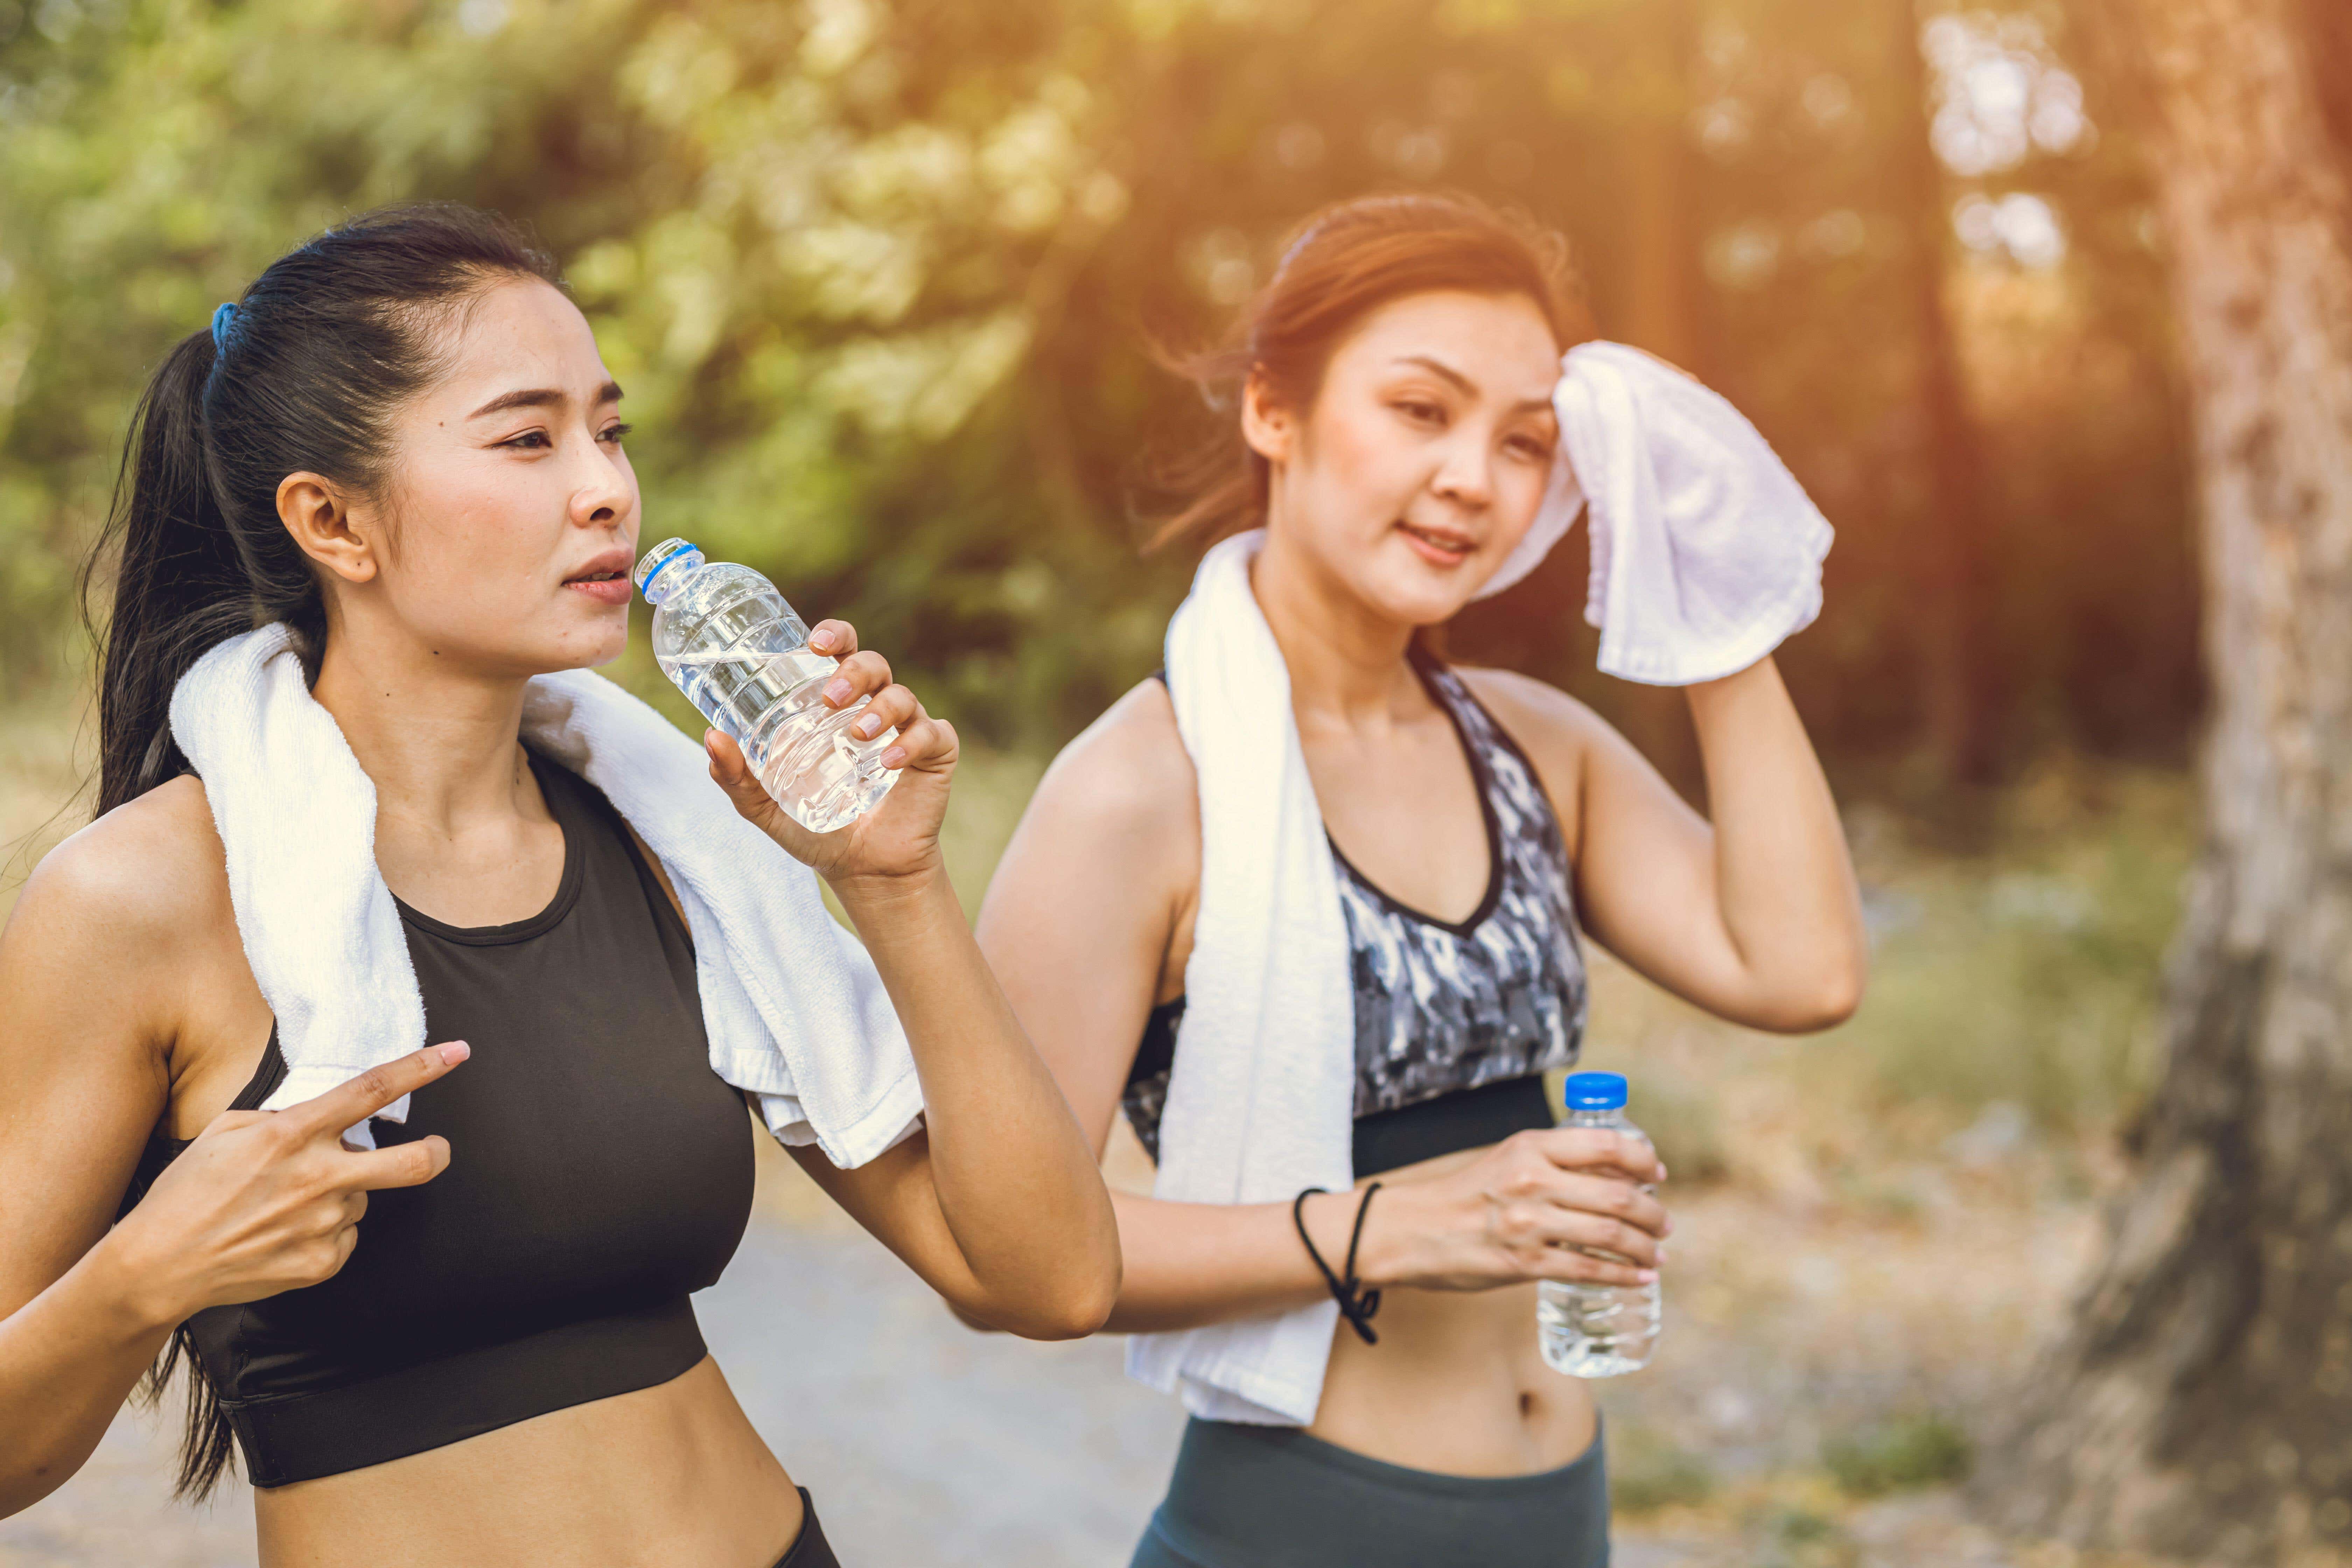 independent.co.uk - Abi Jackson - 7 things fitness experts want you to know about exercise during a heatwave